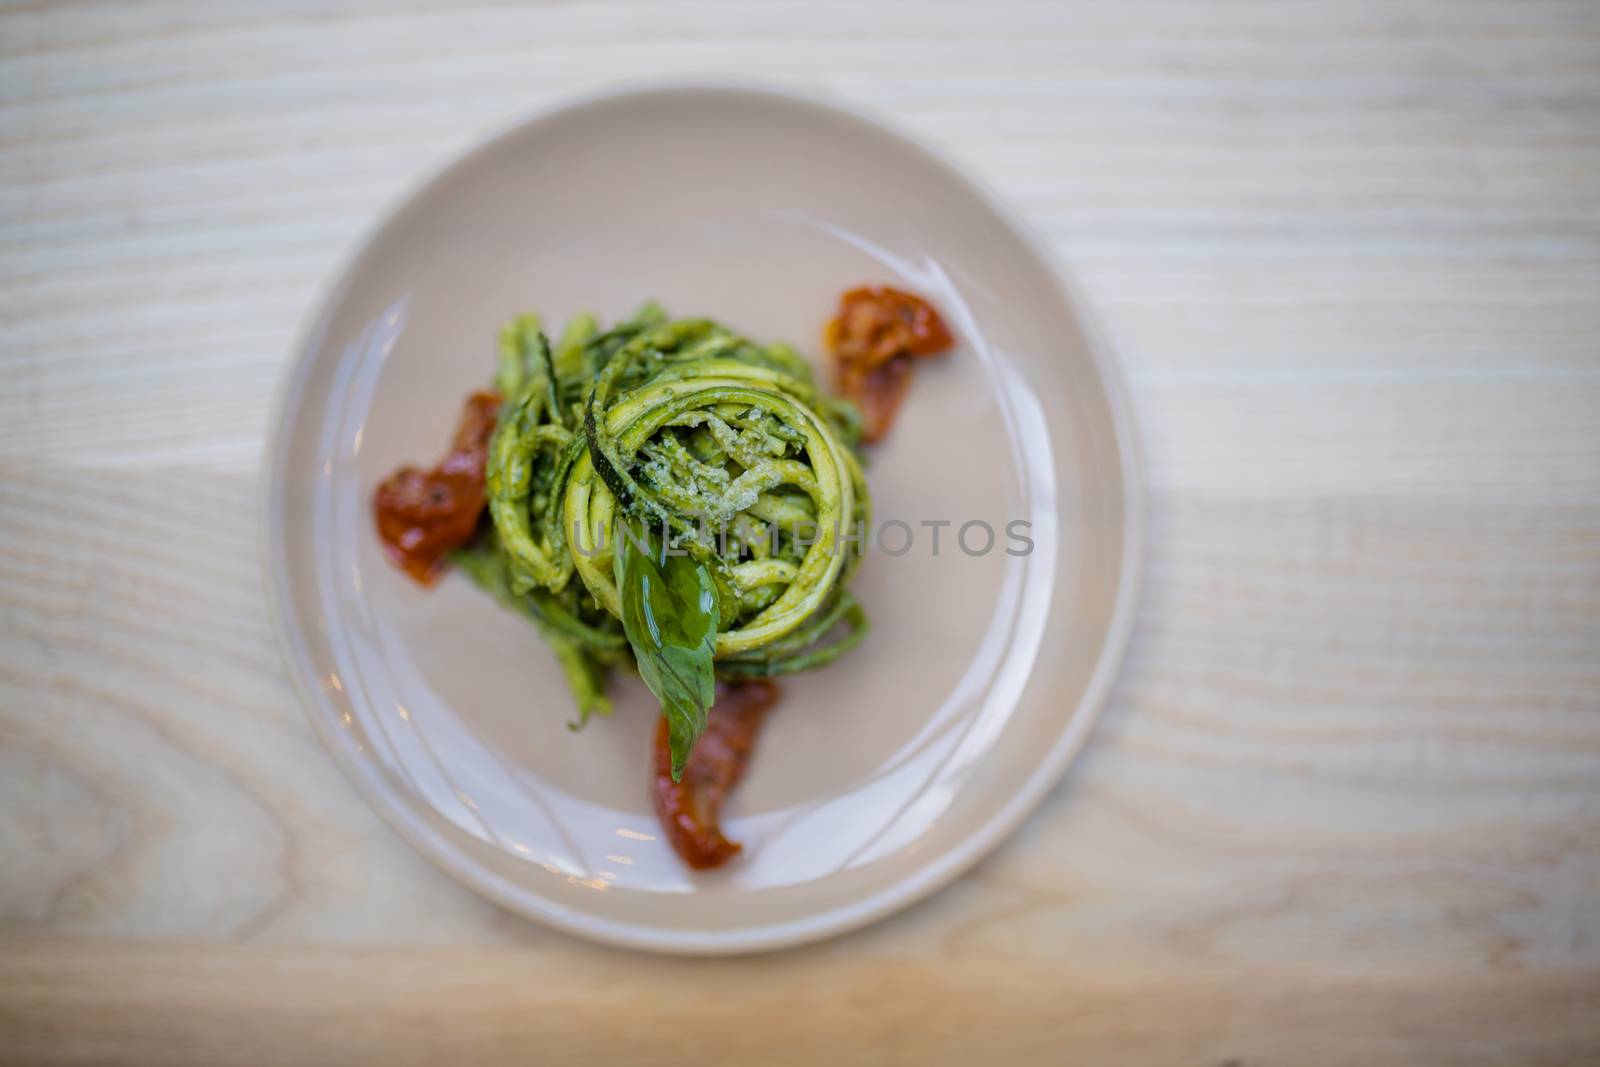 Above view of tasty looking zucchini noodles with a spinach leaf on top and on a wooden restaurant table